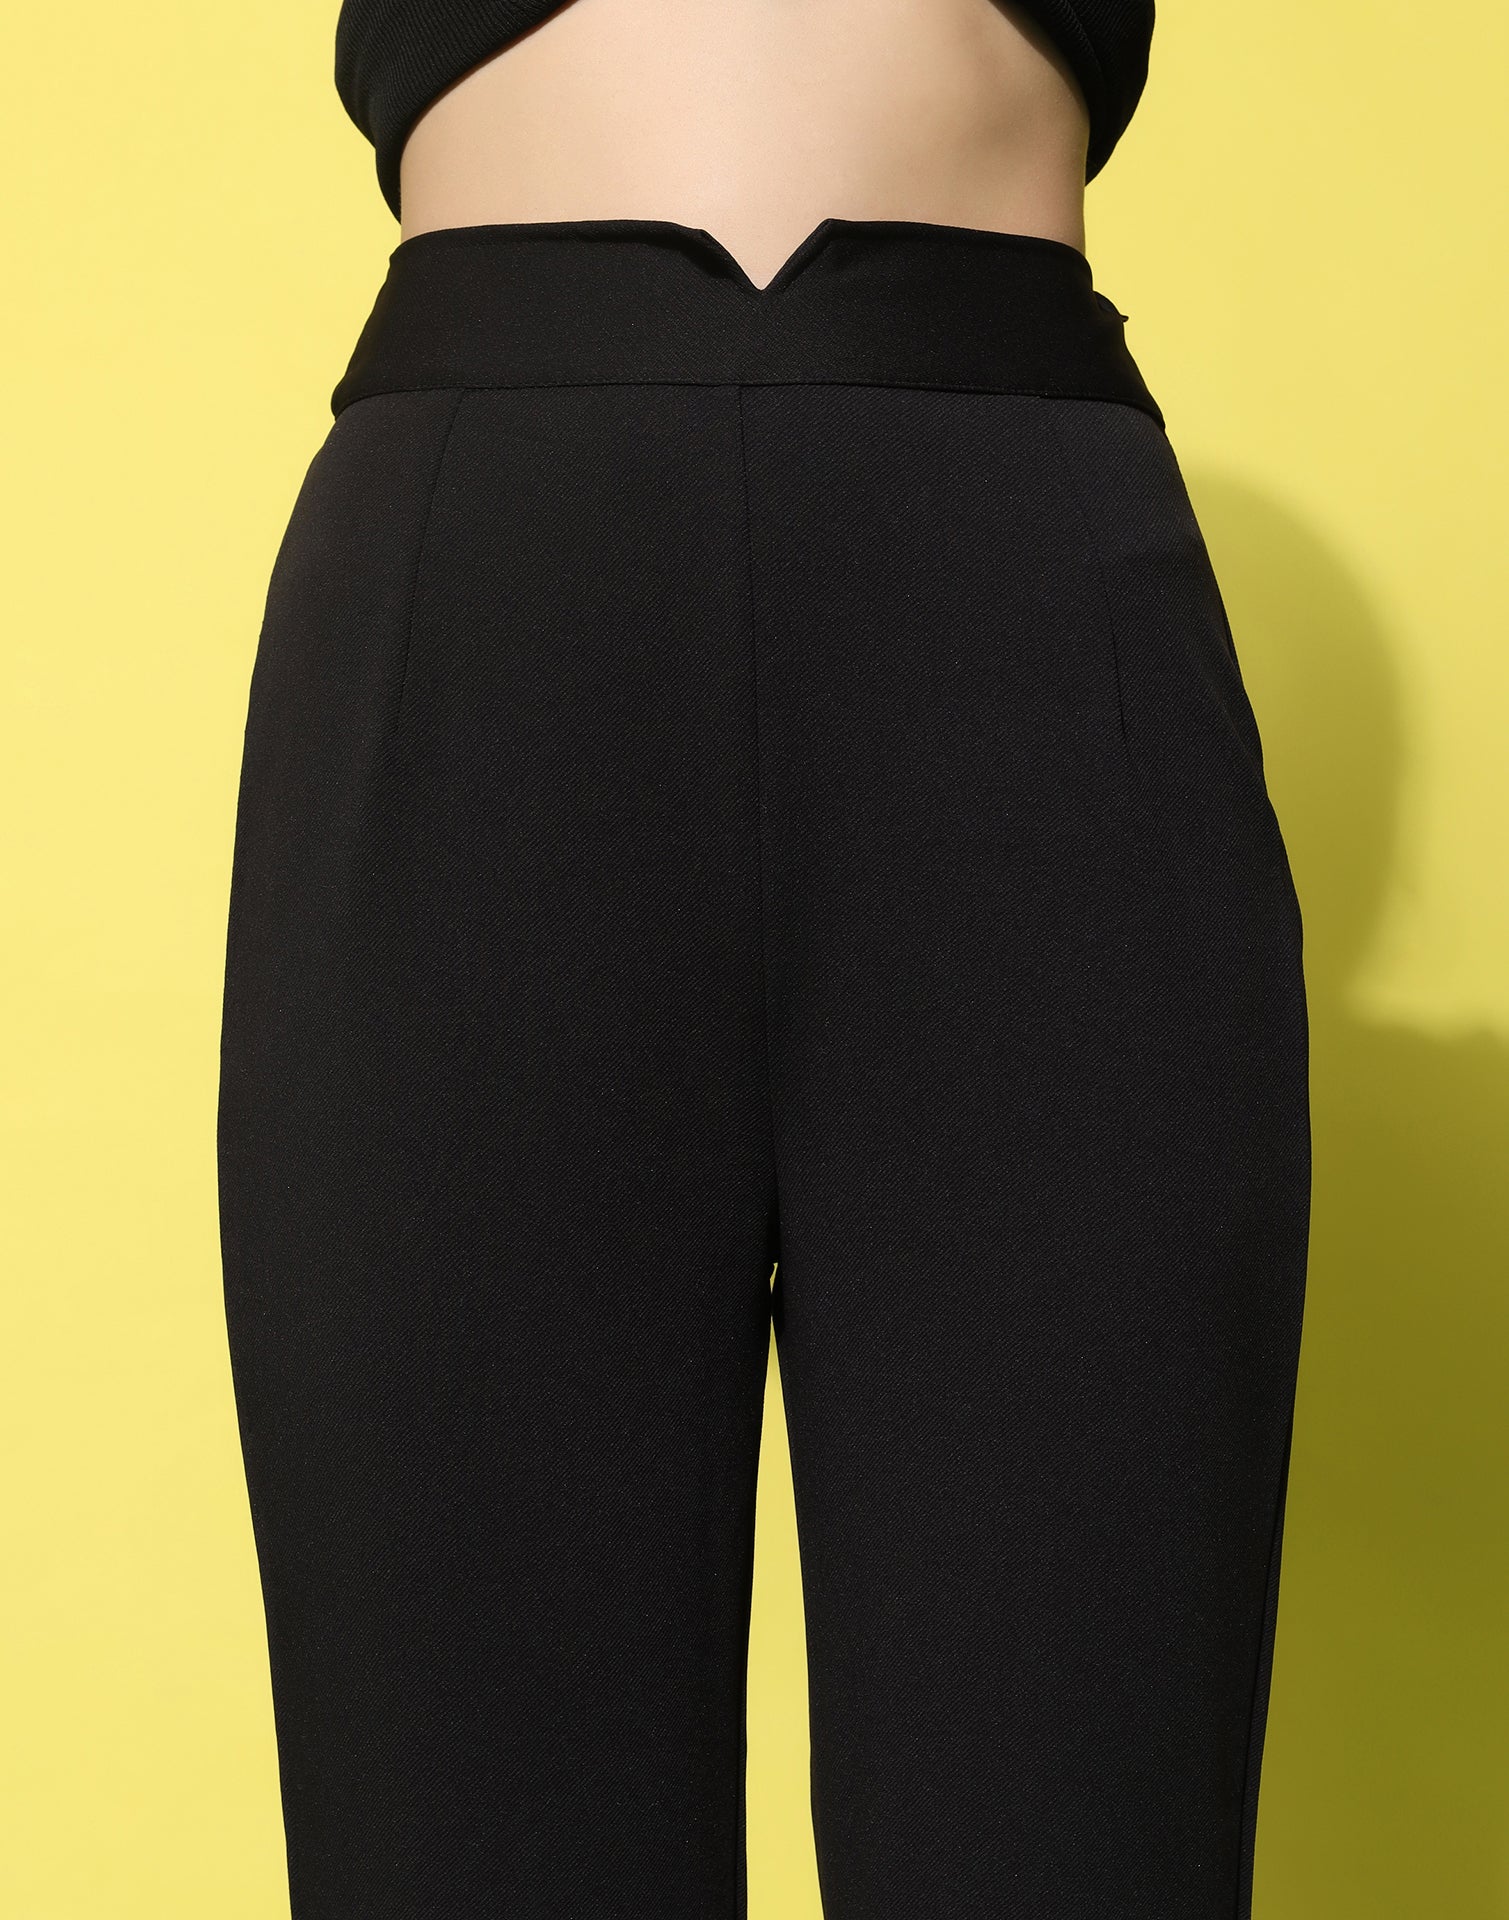 KASSUALLY Trousers and Pants  Buy KASSUALLY Black Bootcut High Rise Trouser  Online  Nykaa Fashion